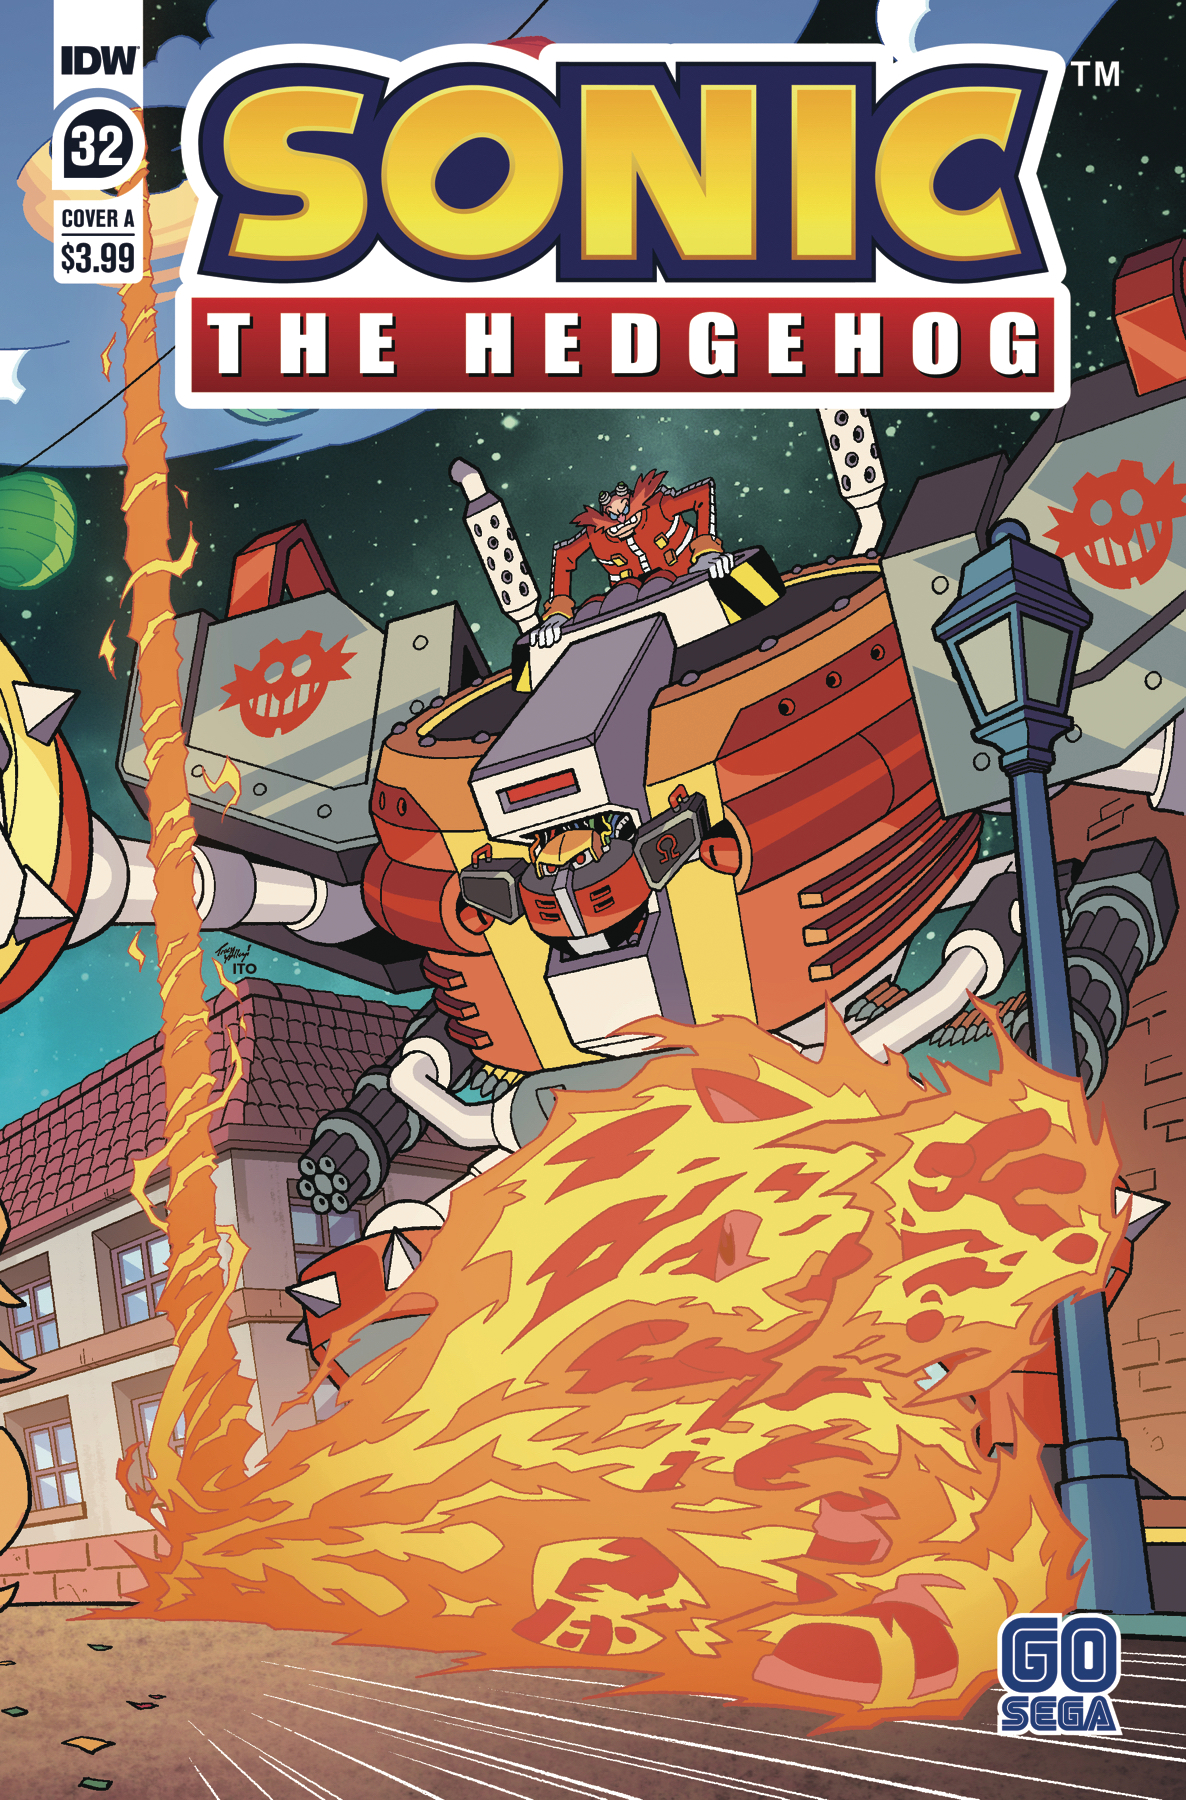 Sonic the Hedgehog #32 Cover A Yardley